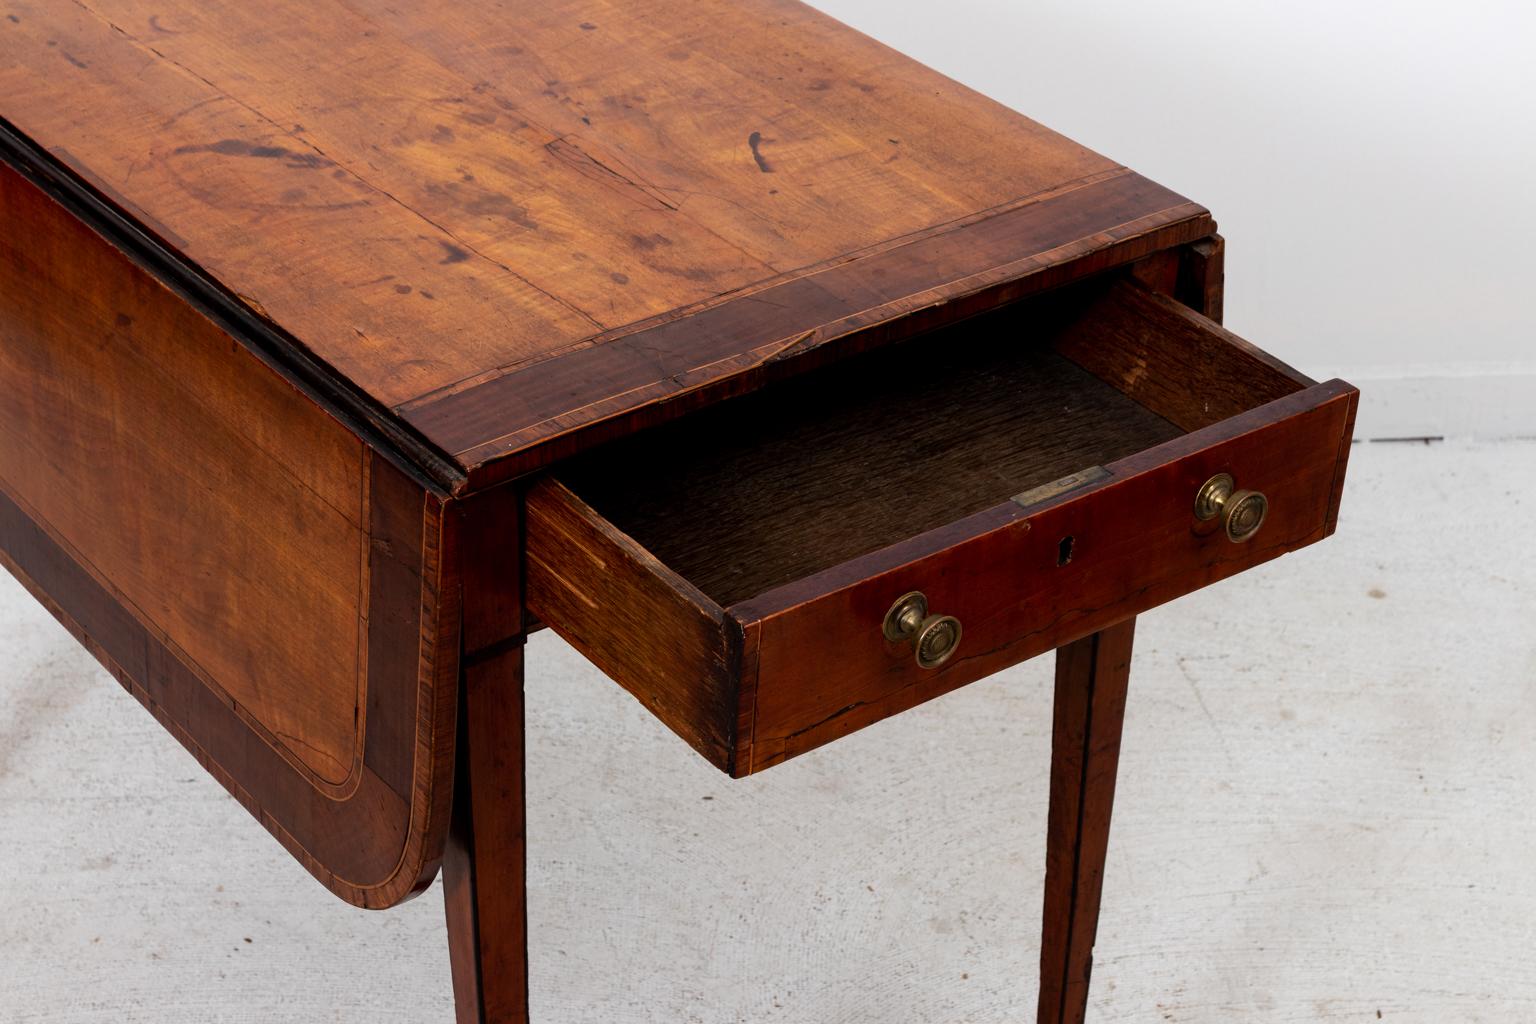 George III style blonde Satinwood drop-leaf pembroke table on castors with mahogany, rosewood veneer on oak, circa 1790s. The piece features an original key to the single, blind drawer and was previously owned by New York Opera singer Von Sickle.